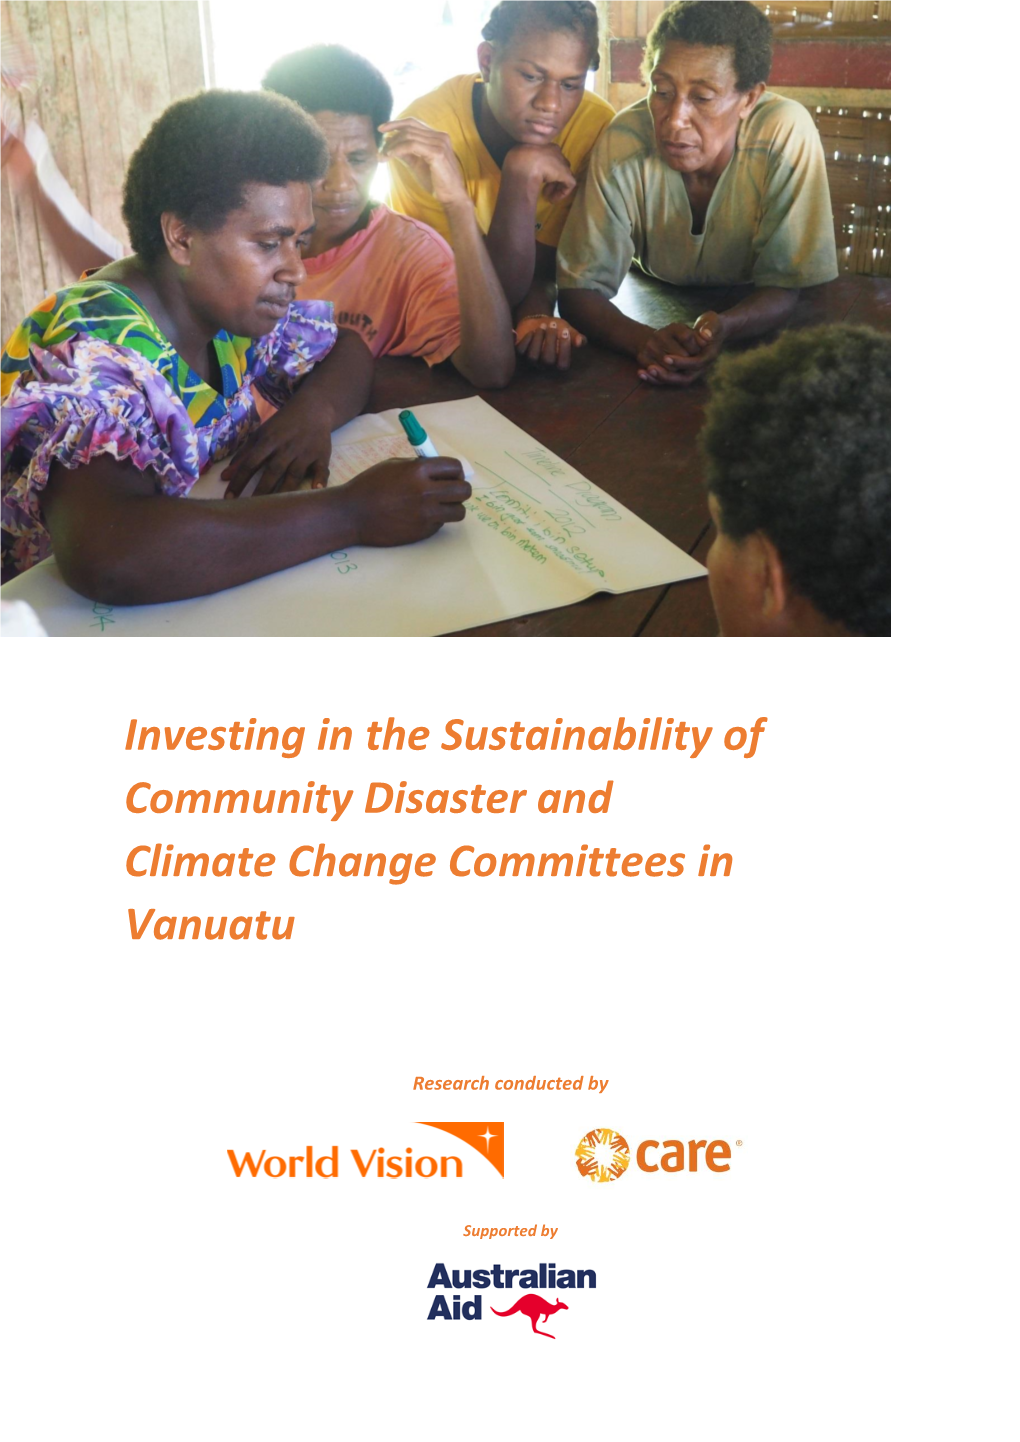 Investing in the Sustainability of Community Disaster and Climate Change Committees in Vanuatu